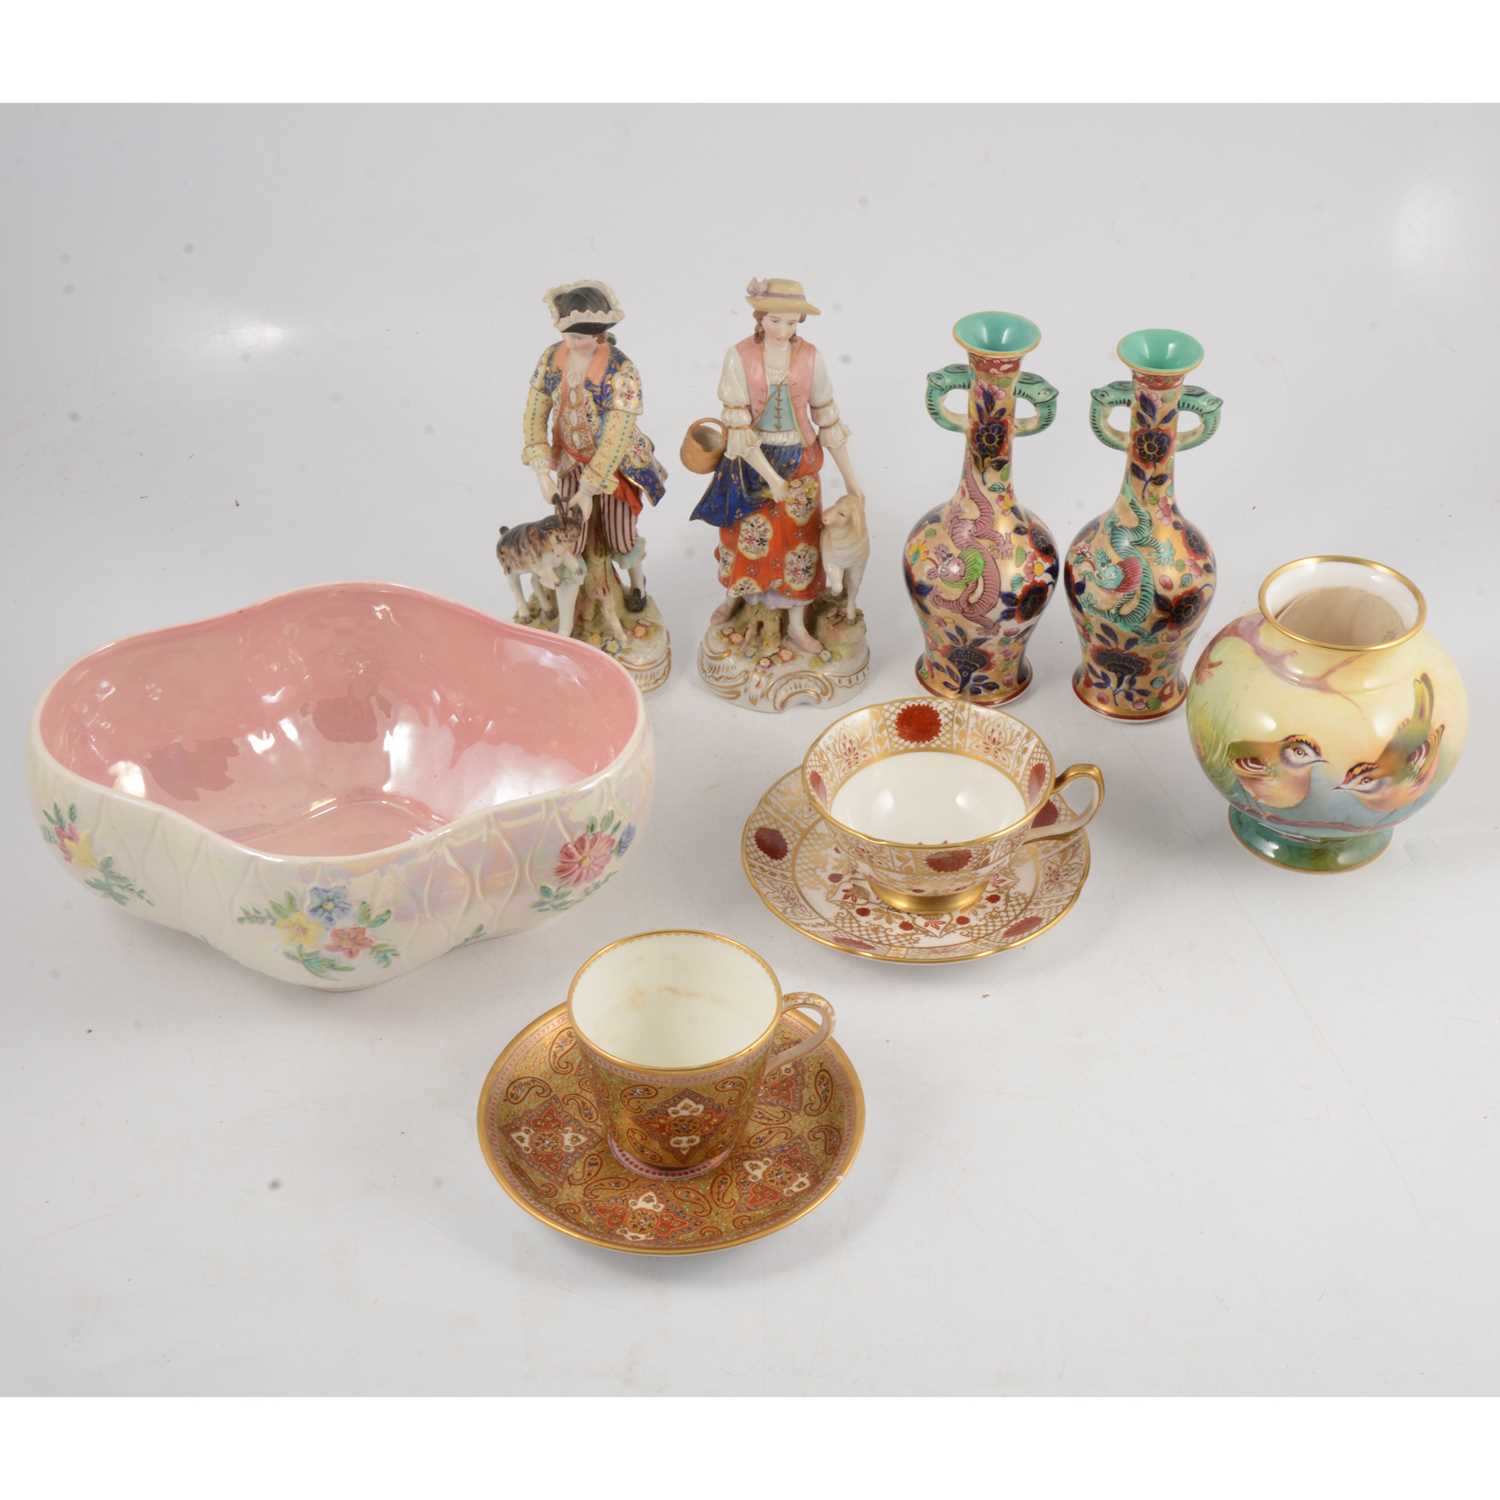 Lot 88 - A pair of continental figures and decorative china